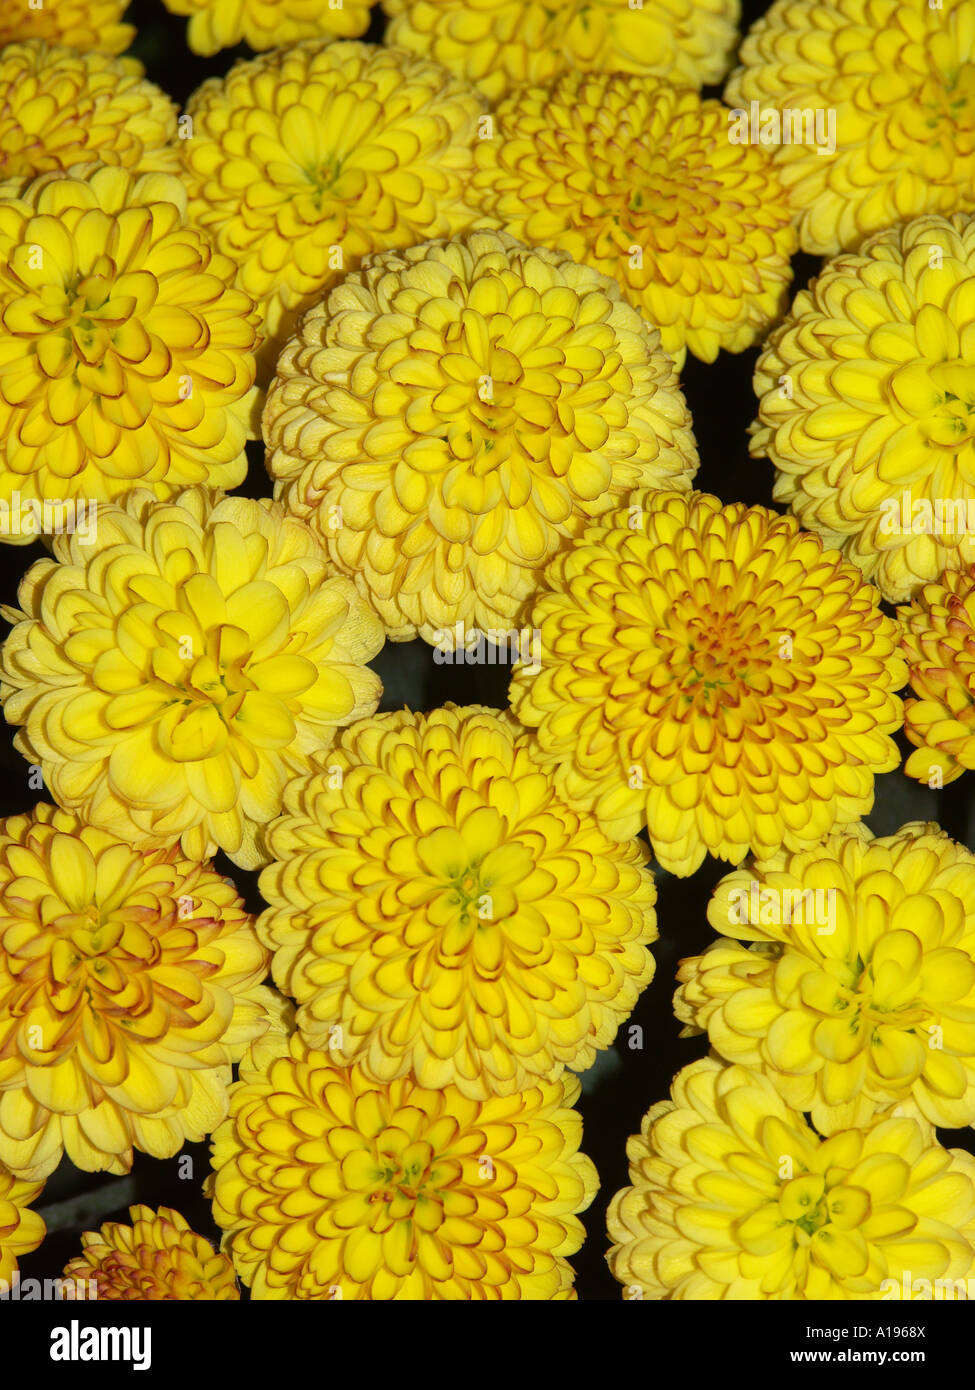 Cluster of bright yellow marigold flowers with orange frilled edges to their decorative petals Stock Photo